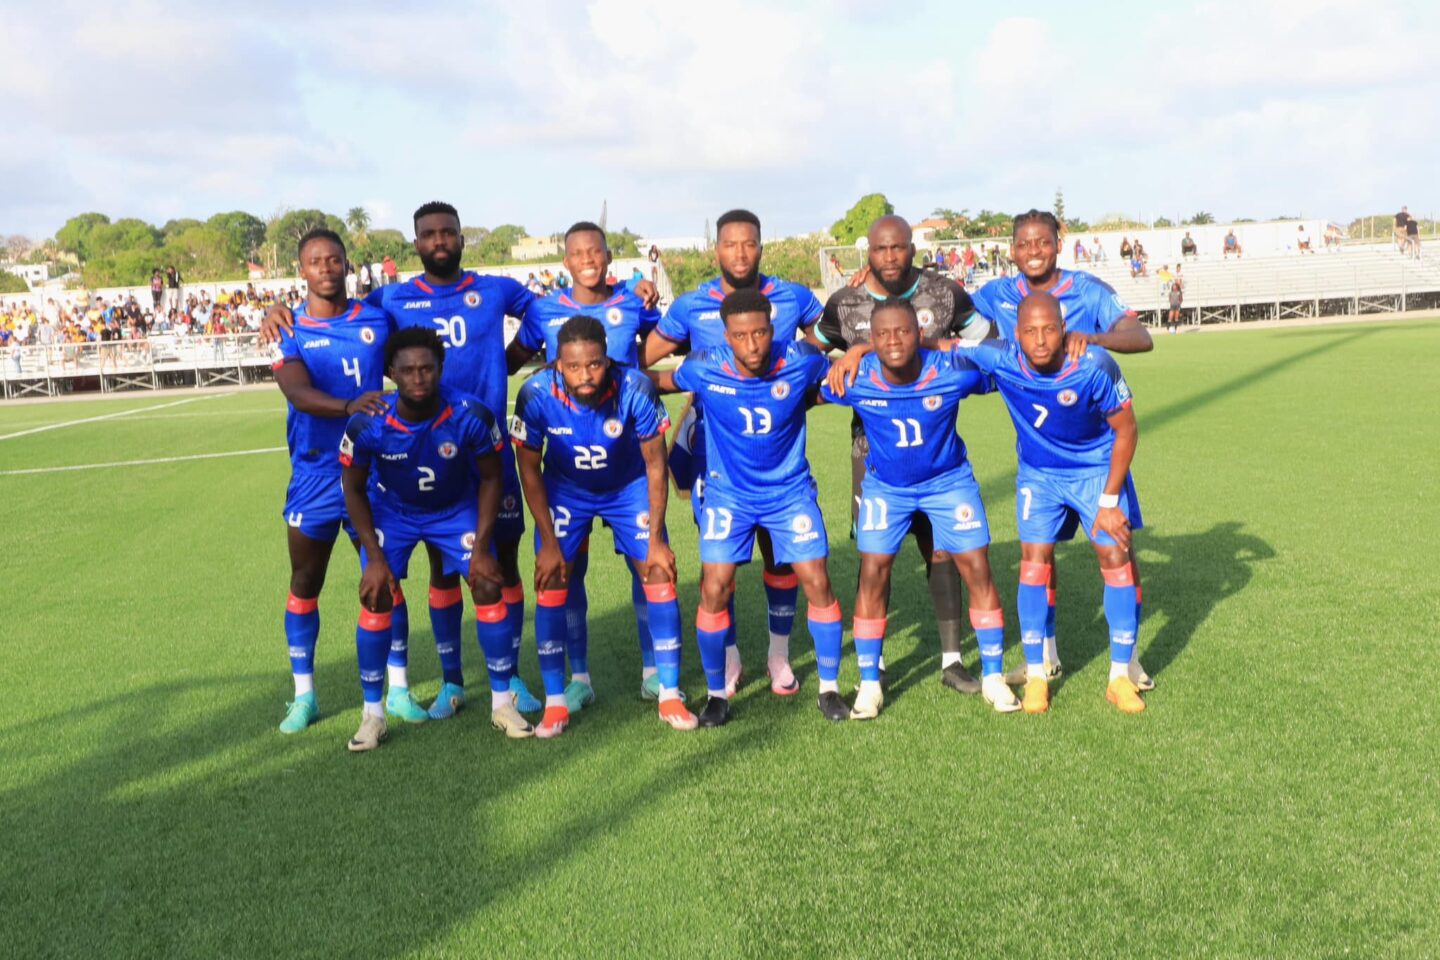 world-qualifier-2026:-hati-beats-barbados-and-pockets-6-points-out-of-6